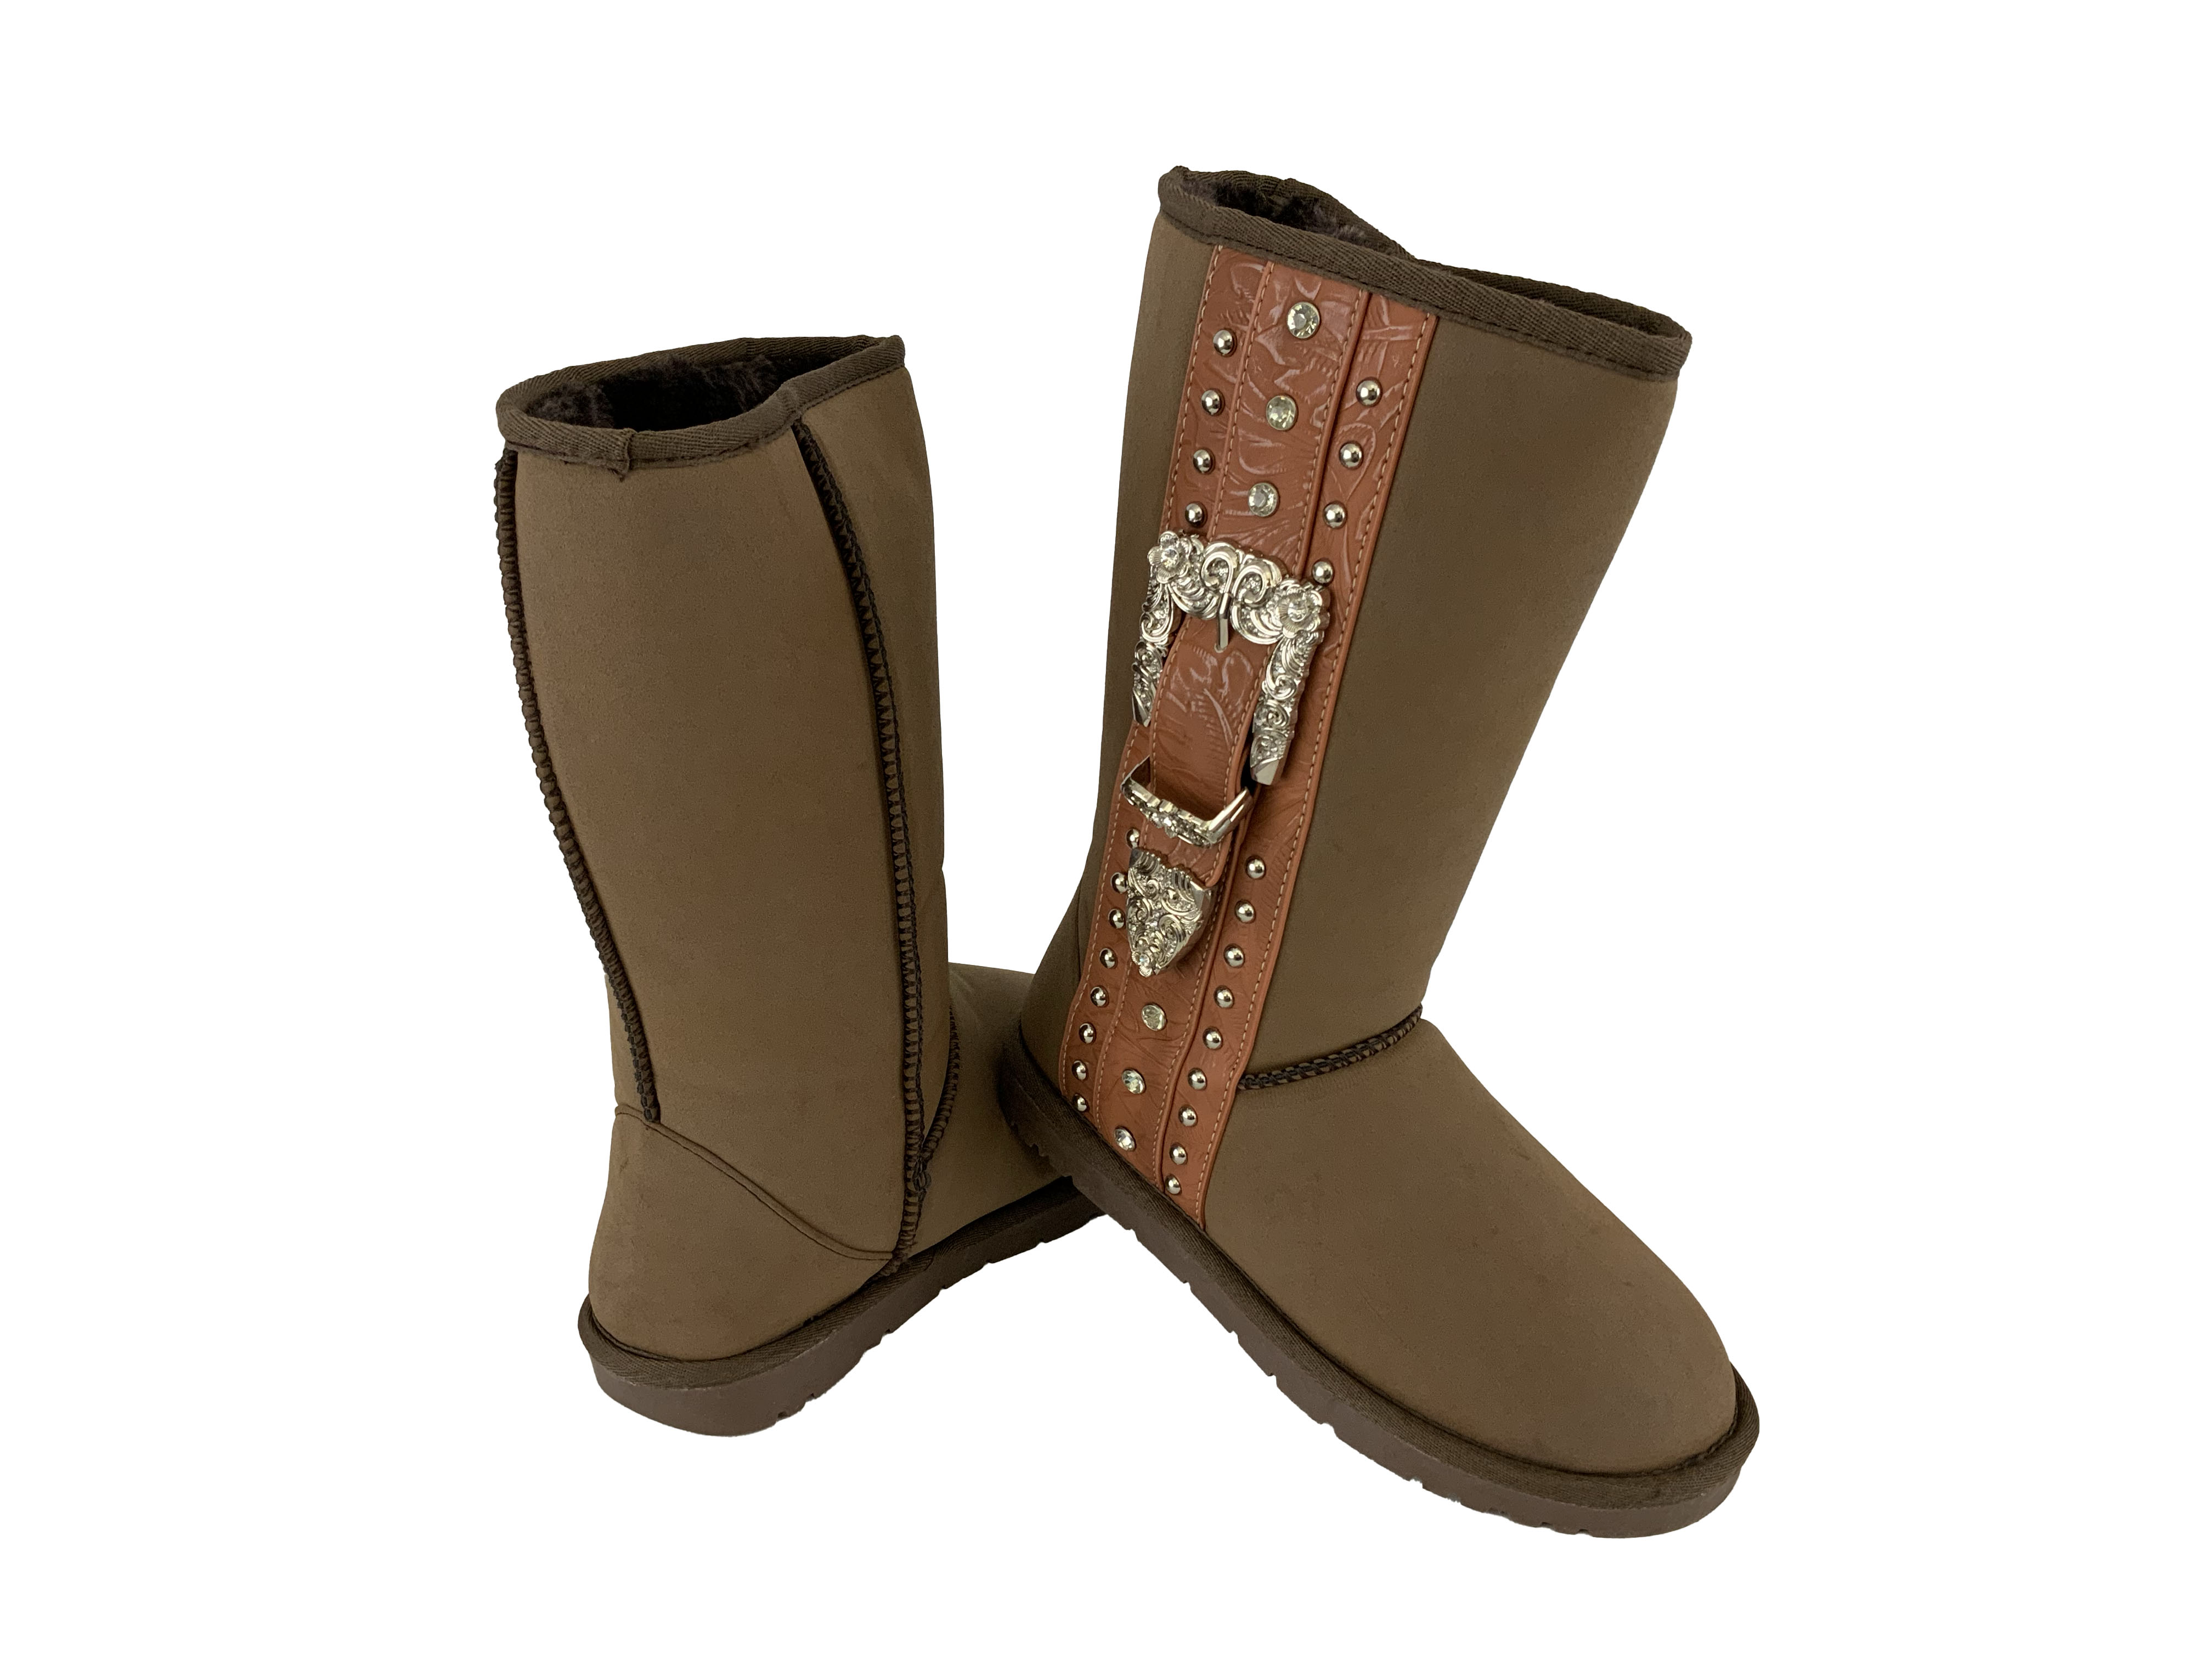 P&G Mocha suede tall boot with buckle and leather strip